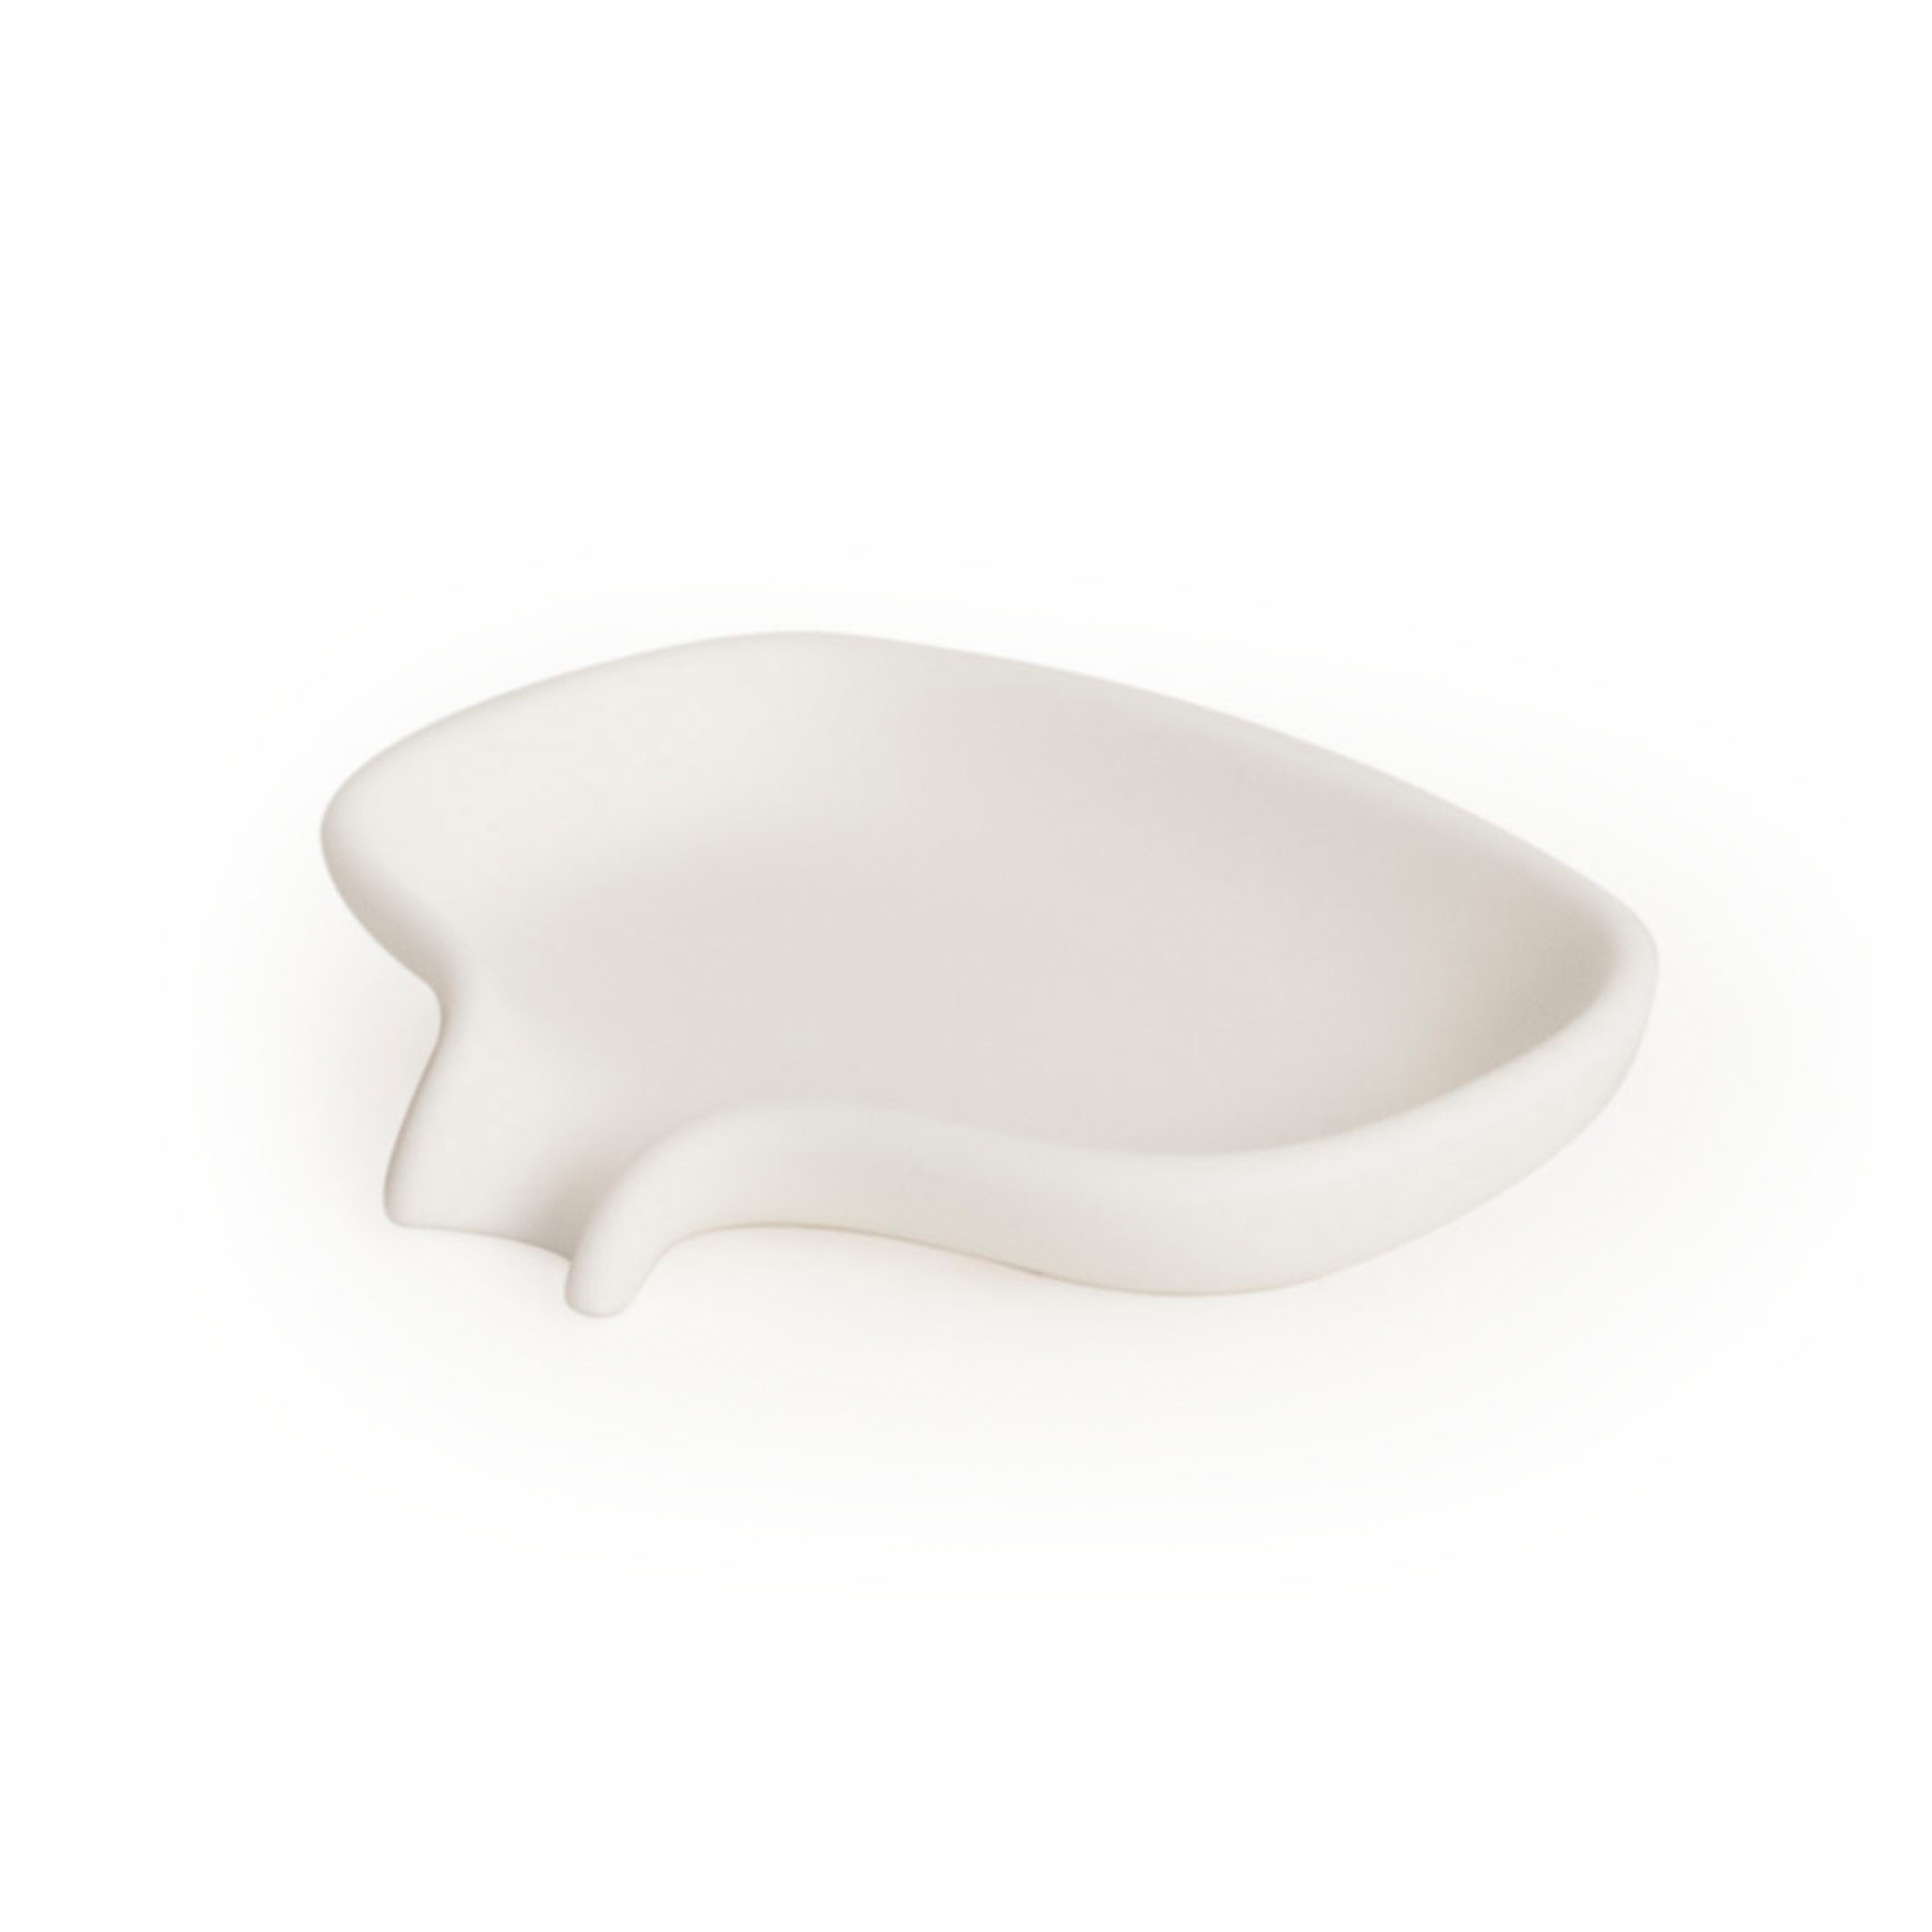 Soap dish with drainage spout silicone, white